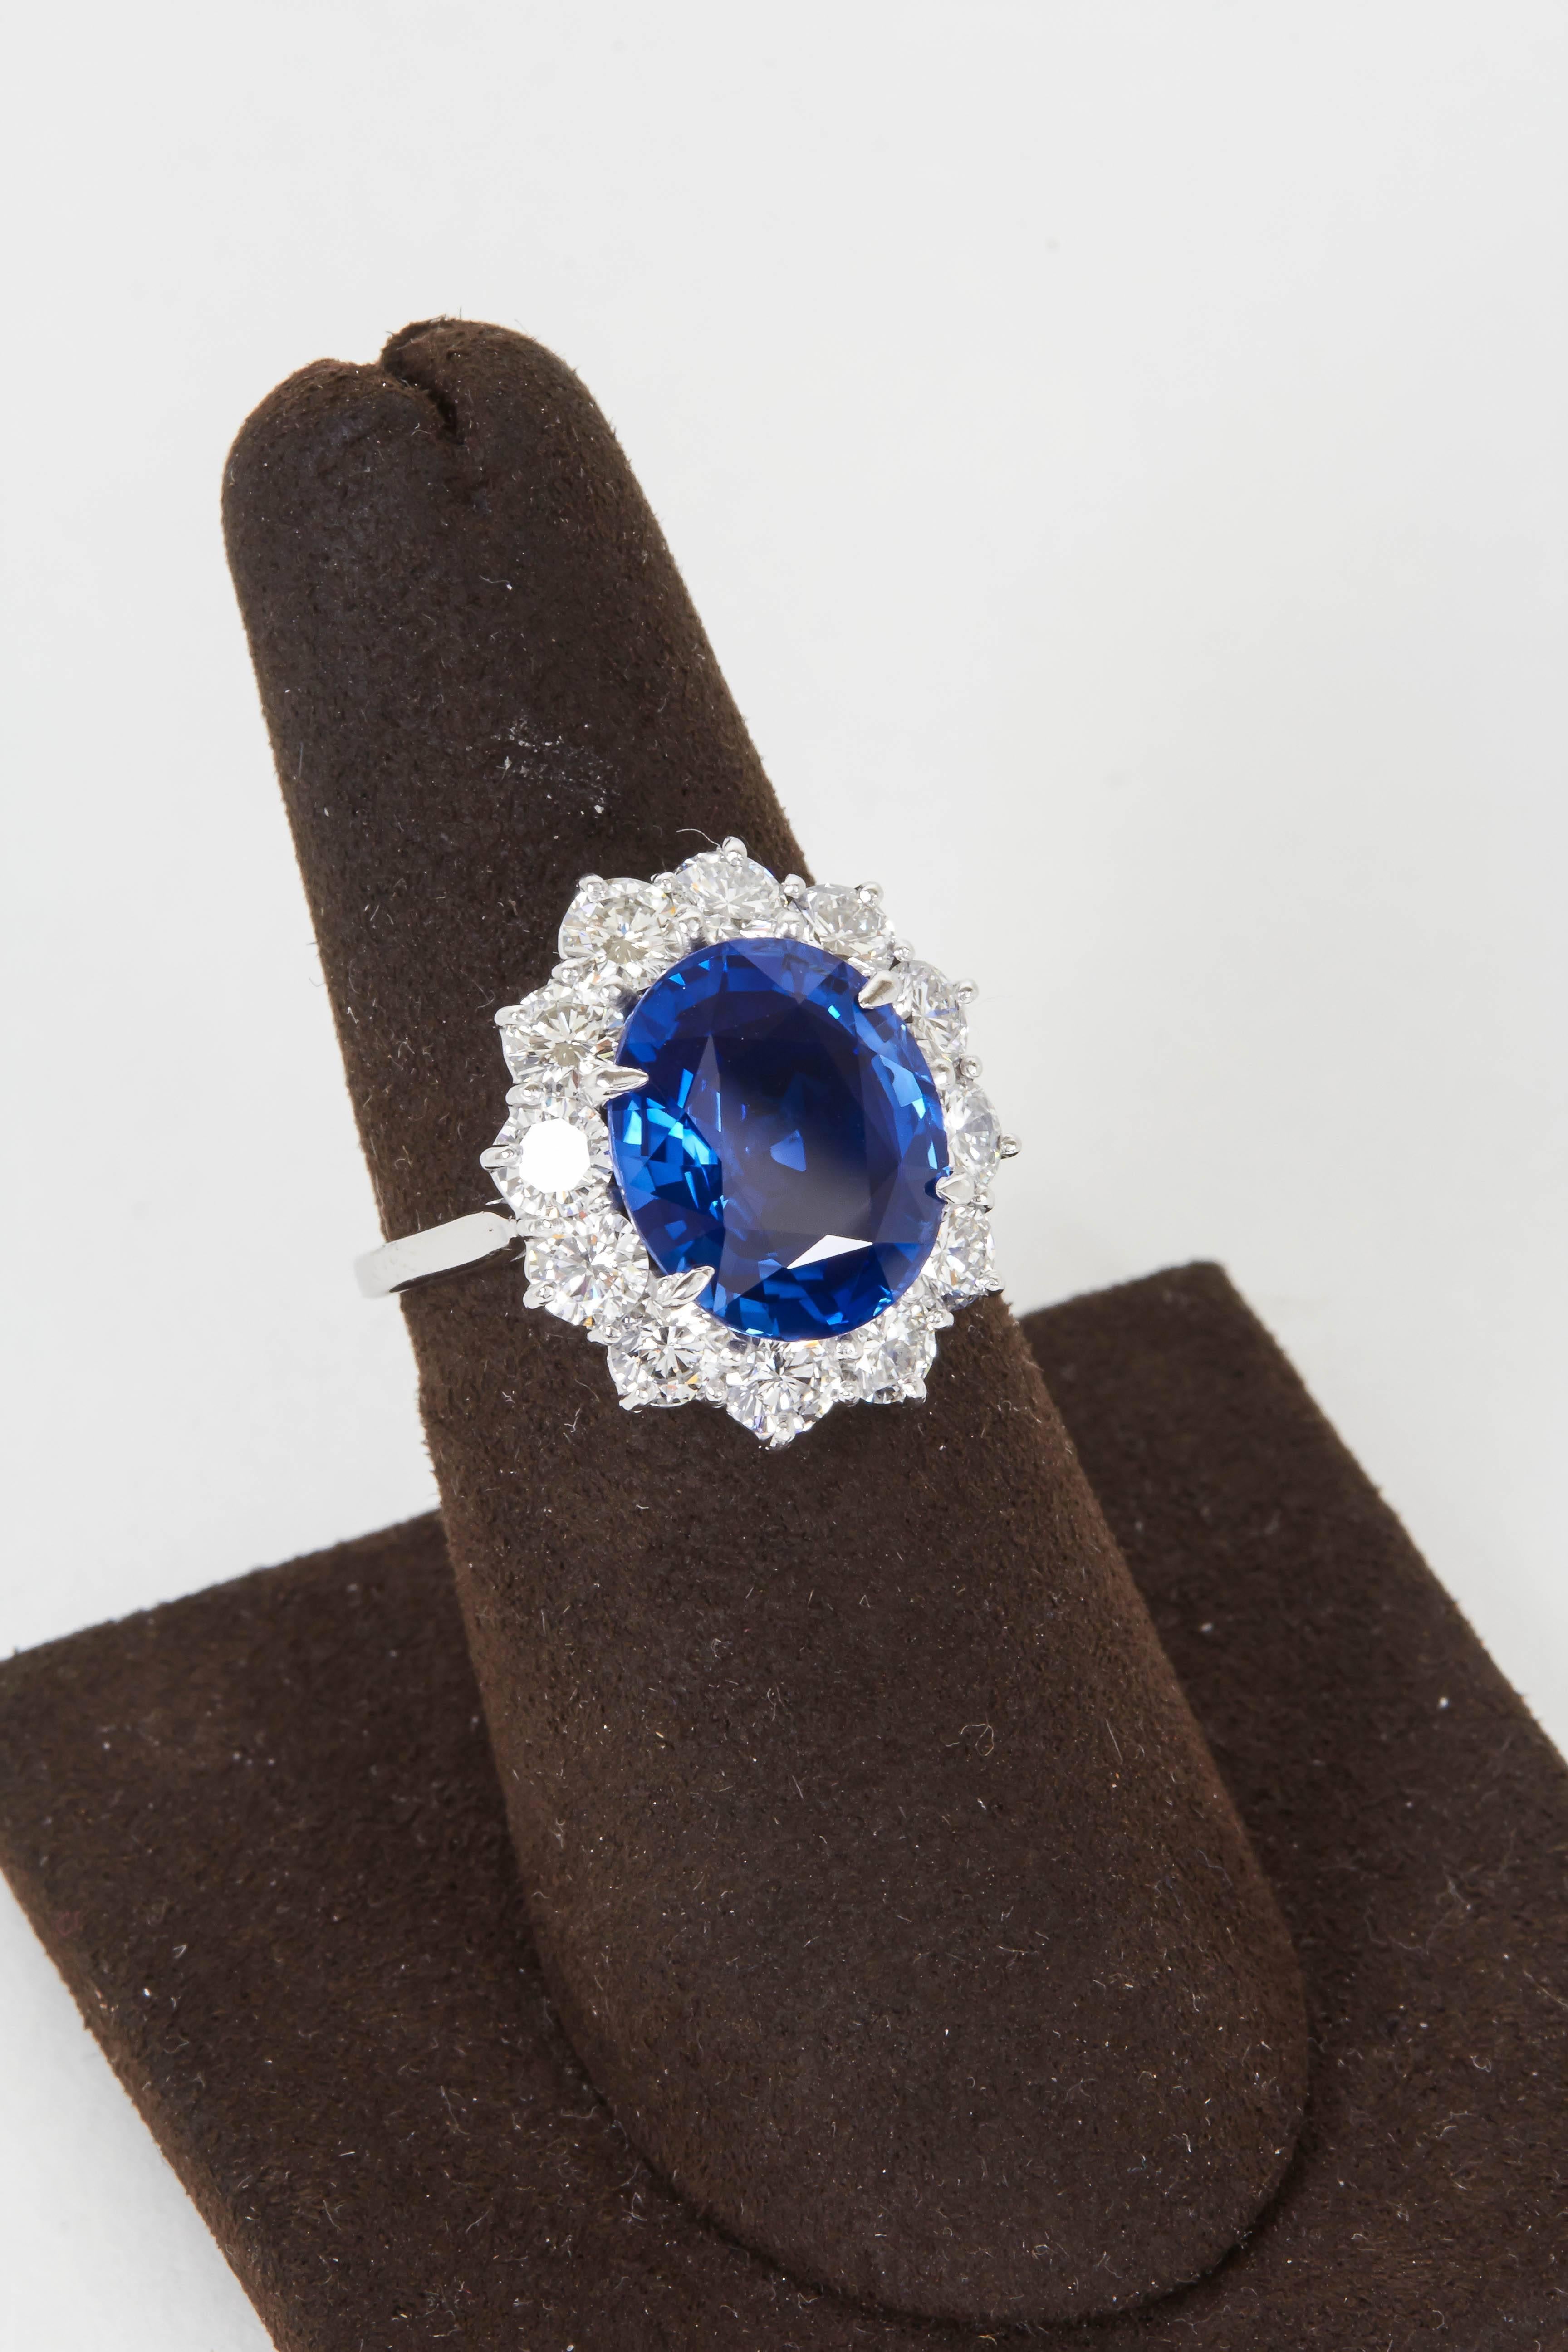 

A beautiful sapphire set in an elegant and timeless ring. 

6.02 carat oval fine blue sapphire, with exceptional color and brilliance, set in a platinum and diamond mounting featuring 2.88 carats of F color VS clarity round brilliant cut